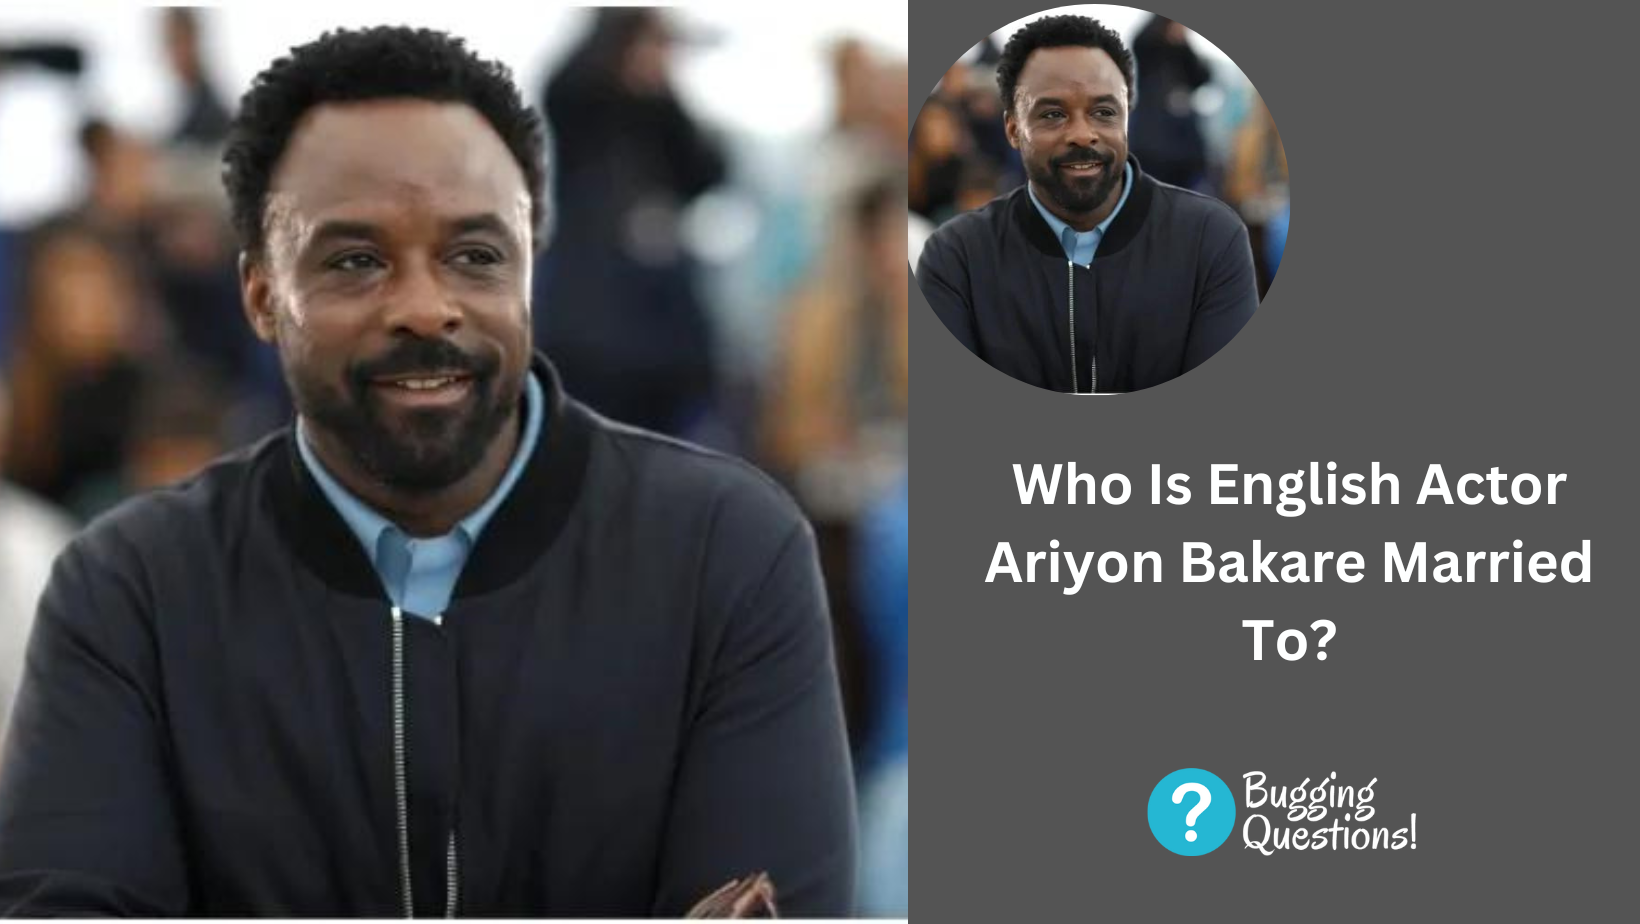 Who Is English Actor Ariyon Bakare Married To?